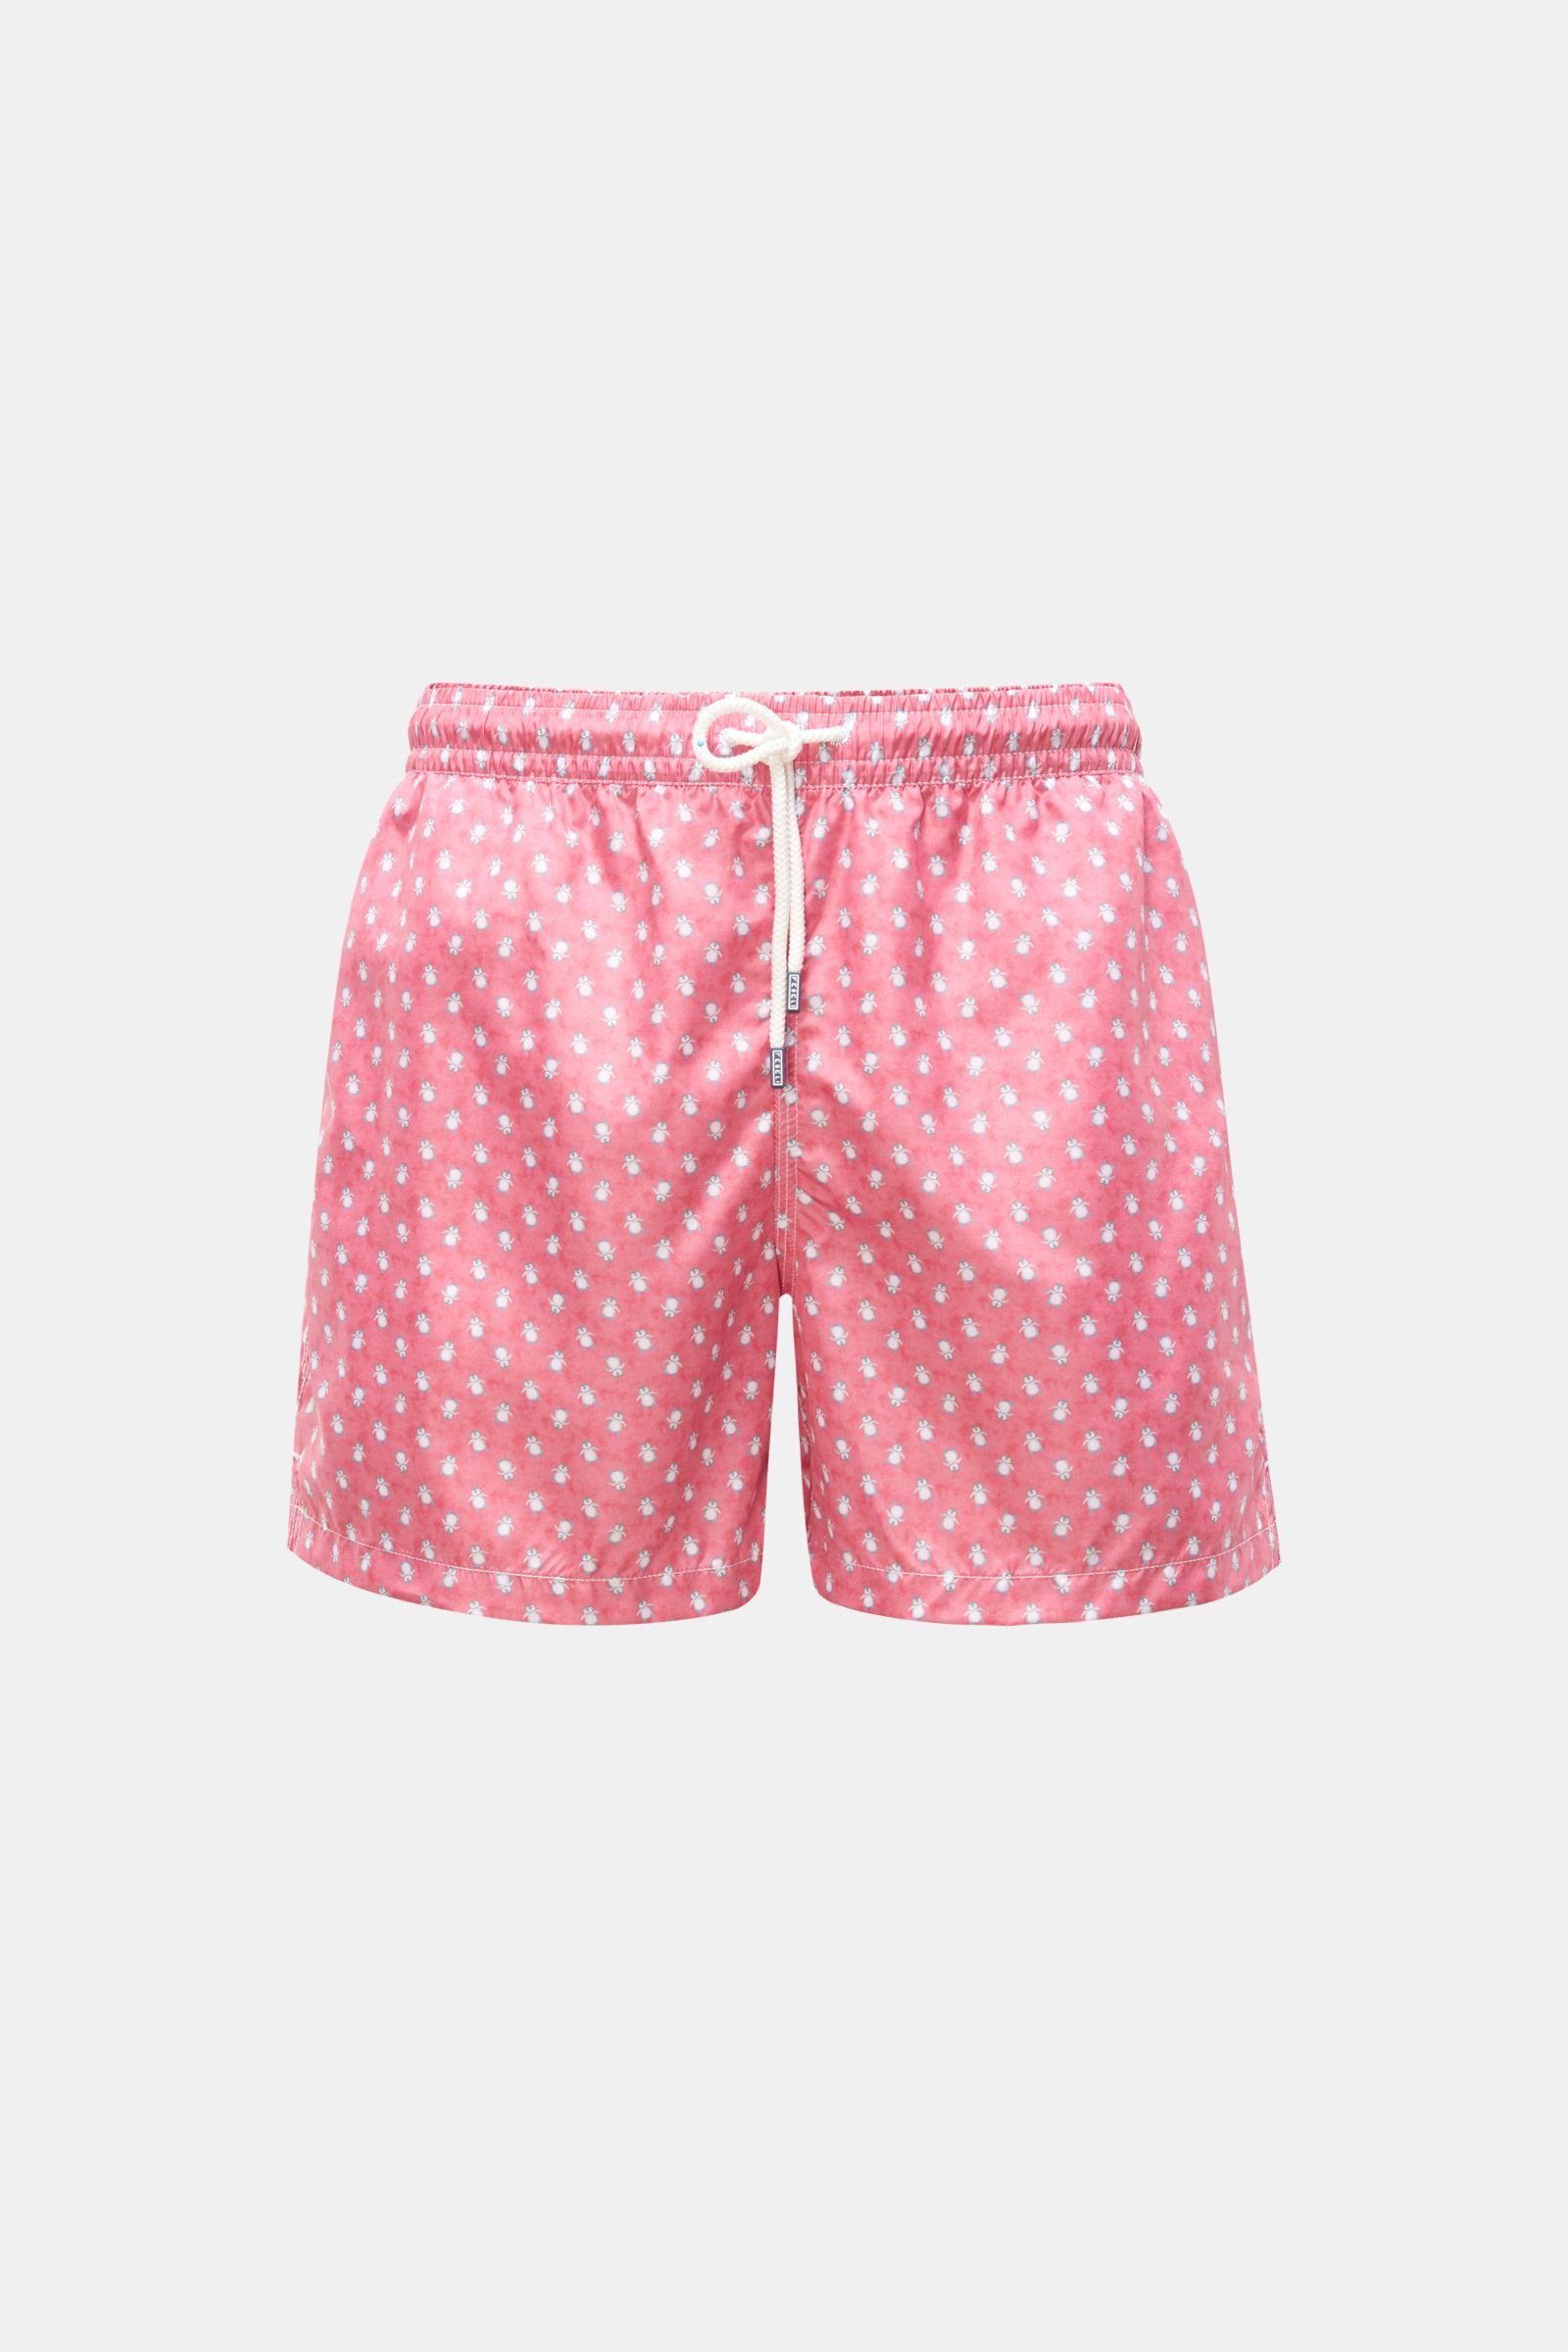 Swim shorts 'Madeira Airstop' light red patterned